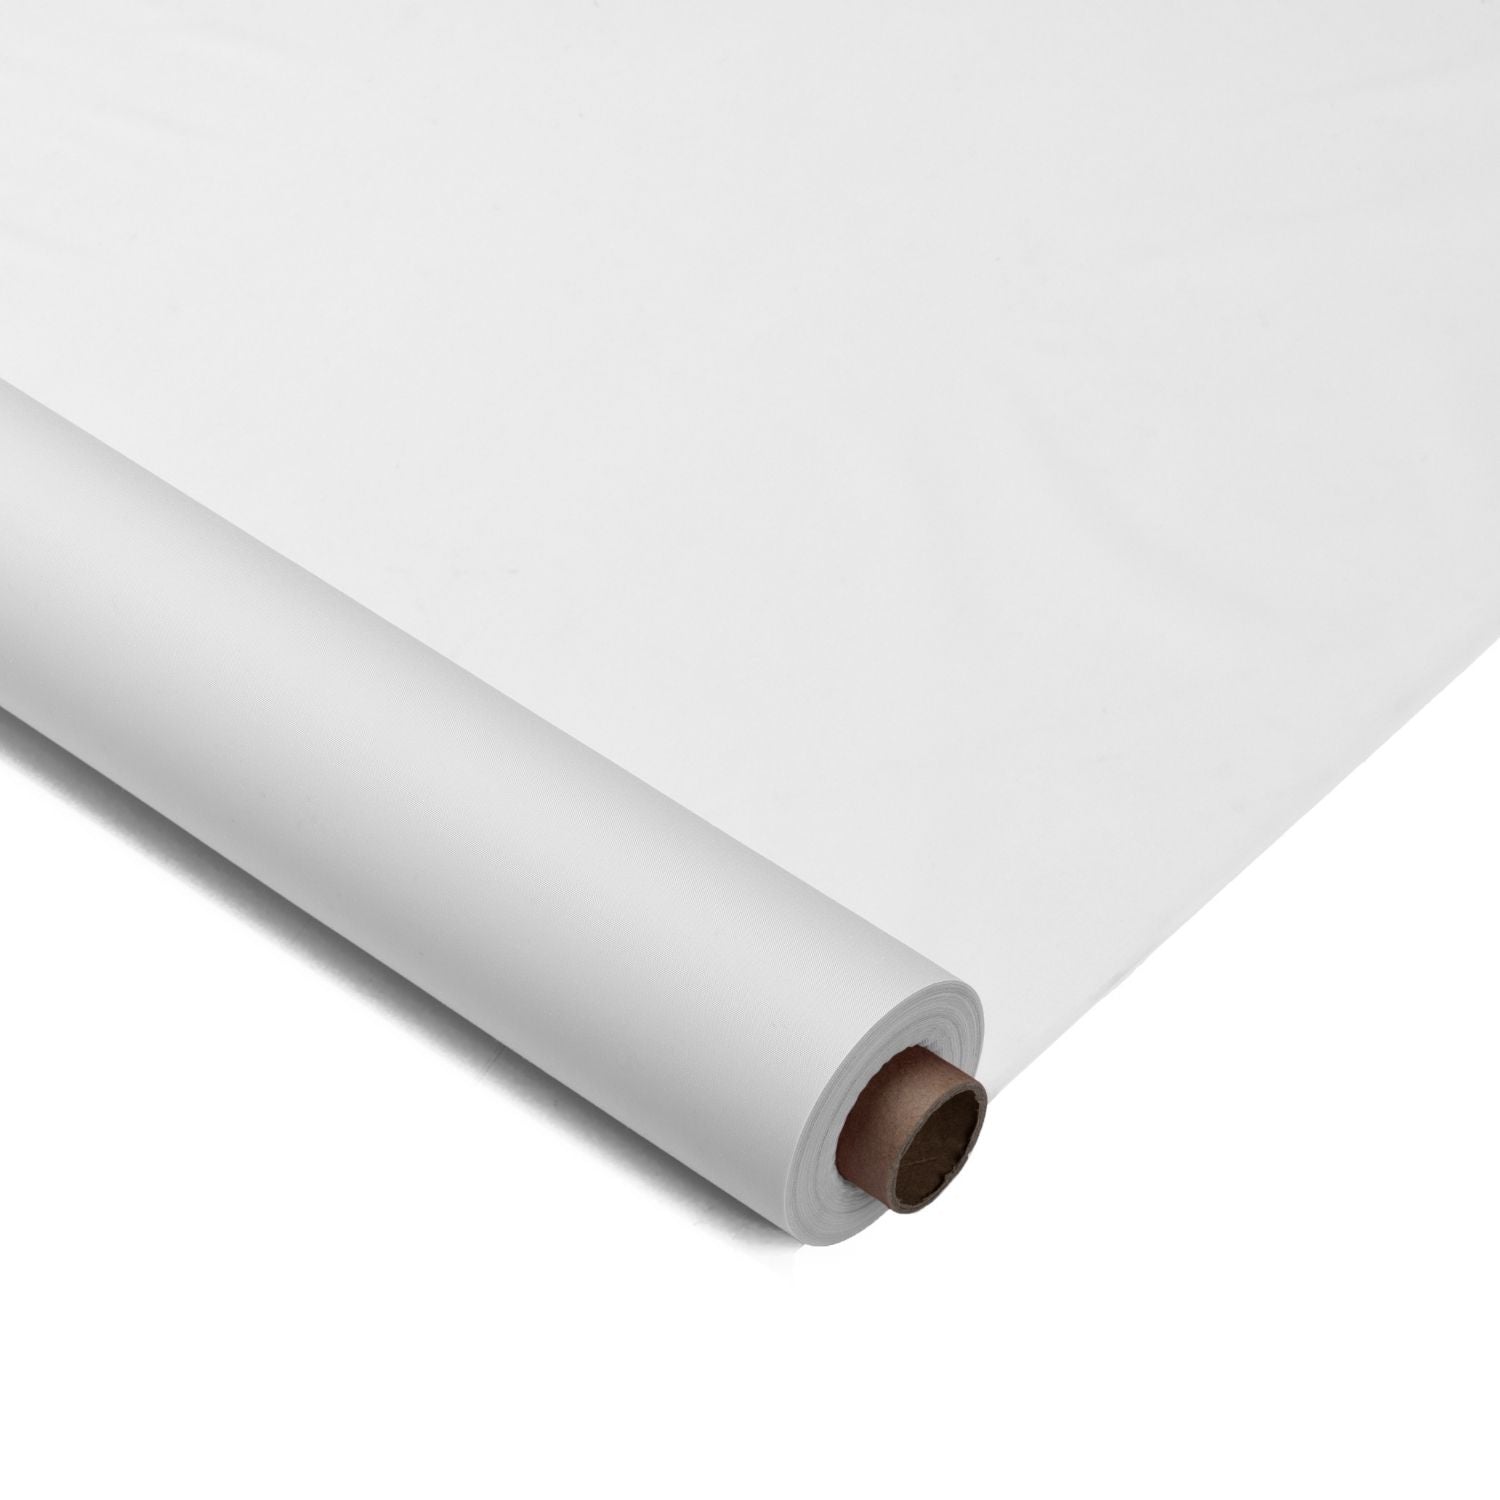 40 In. X 100 Ft. Premium White Plastic Table Roll | 6 Pack